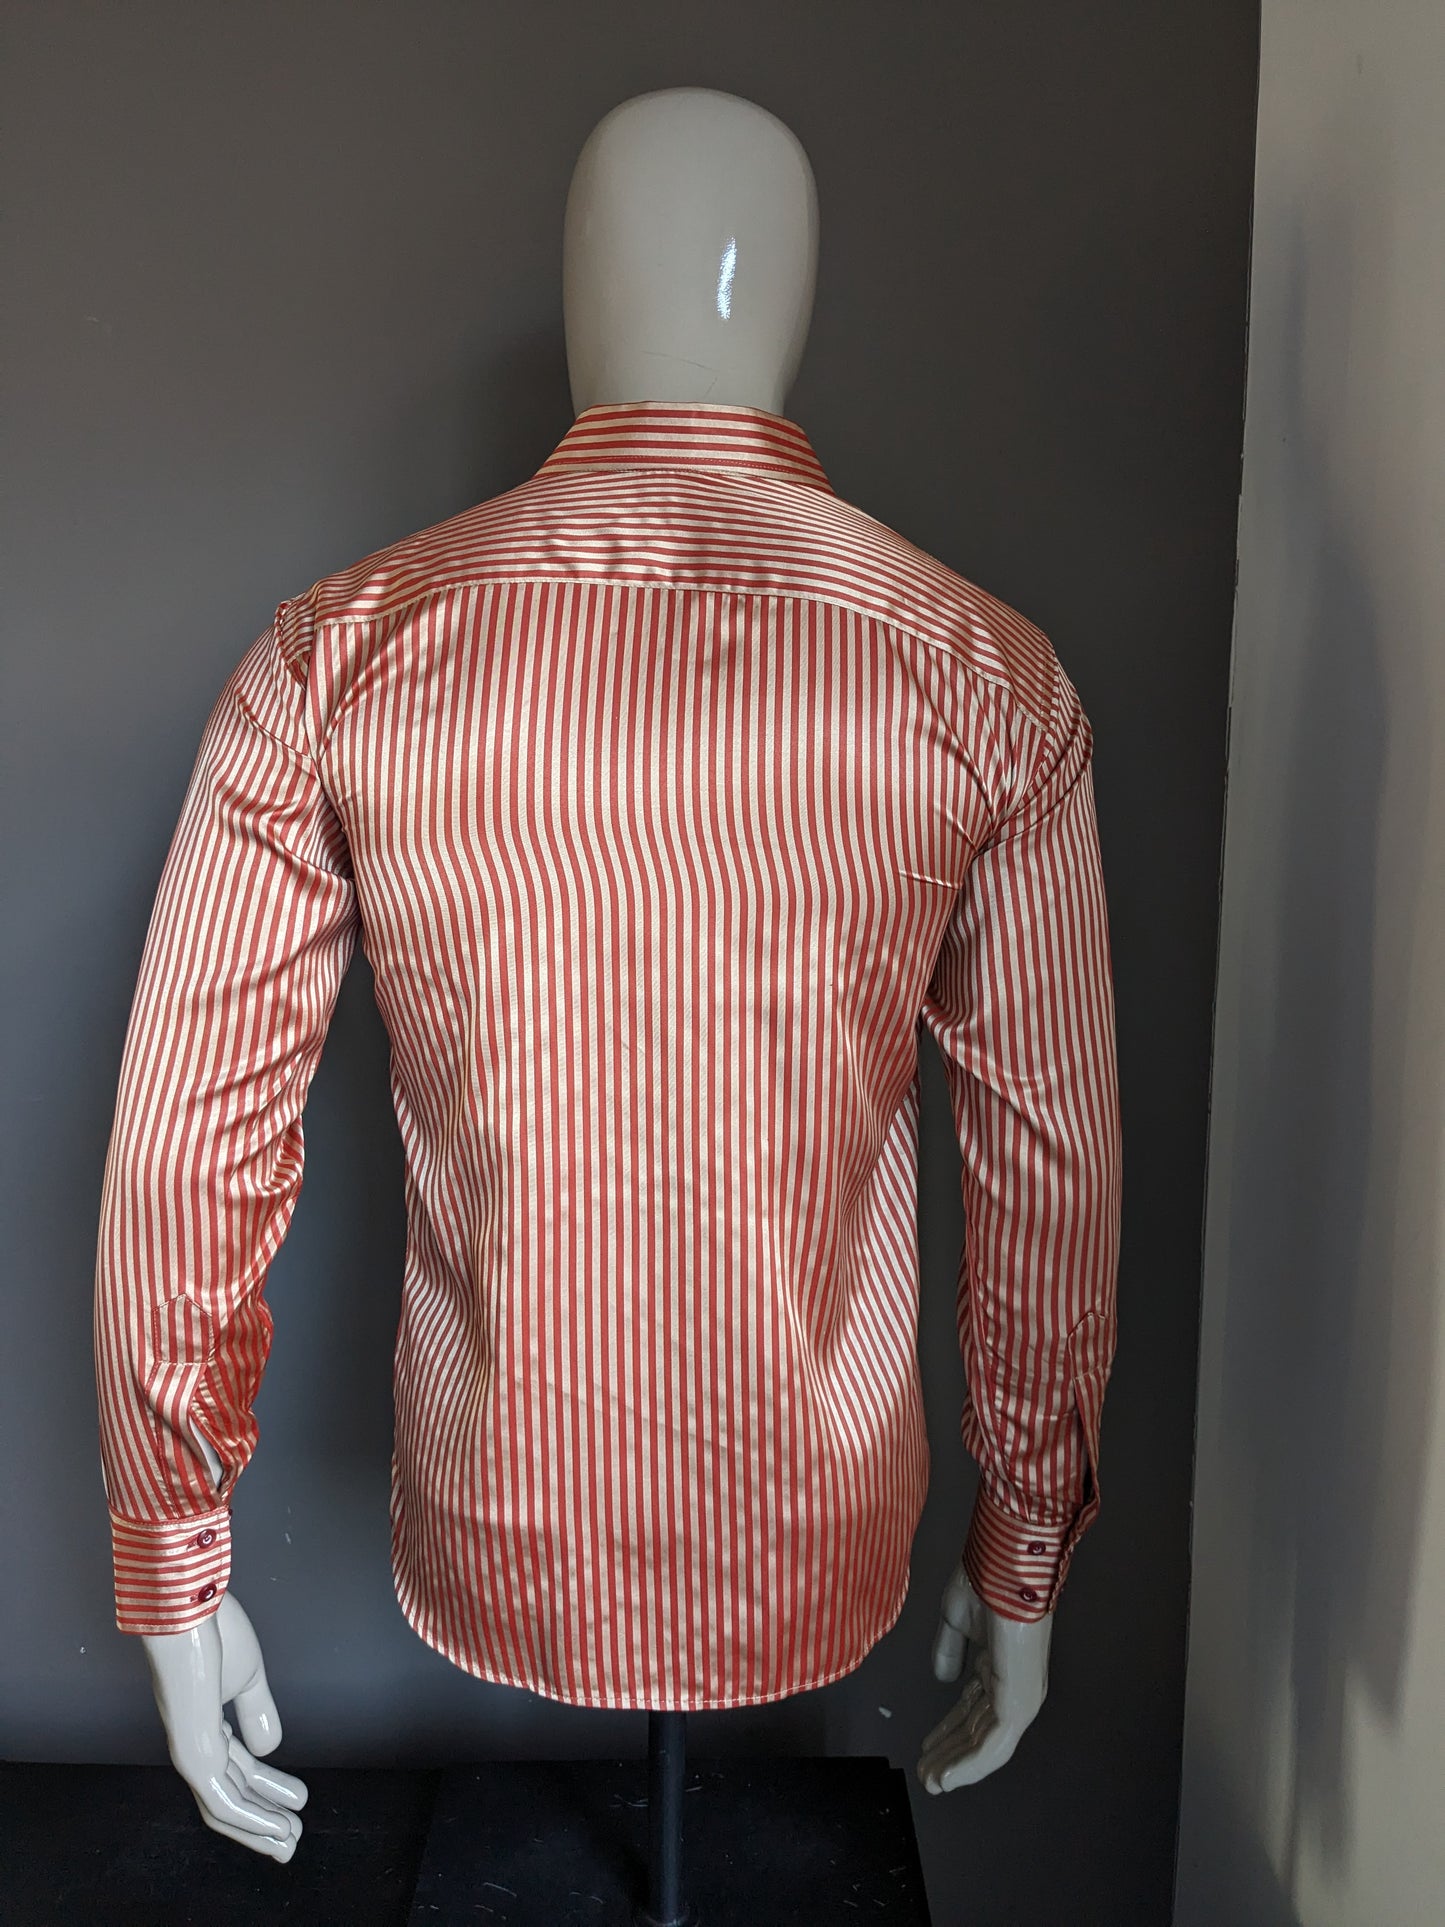 Vintage Bangalore shirt. Red gold -colored striped. Size M.